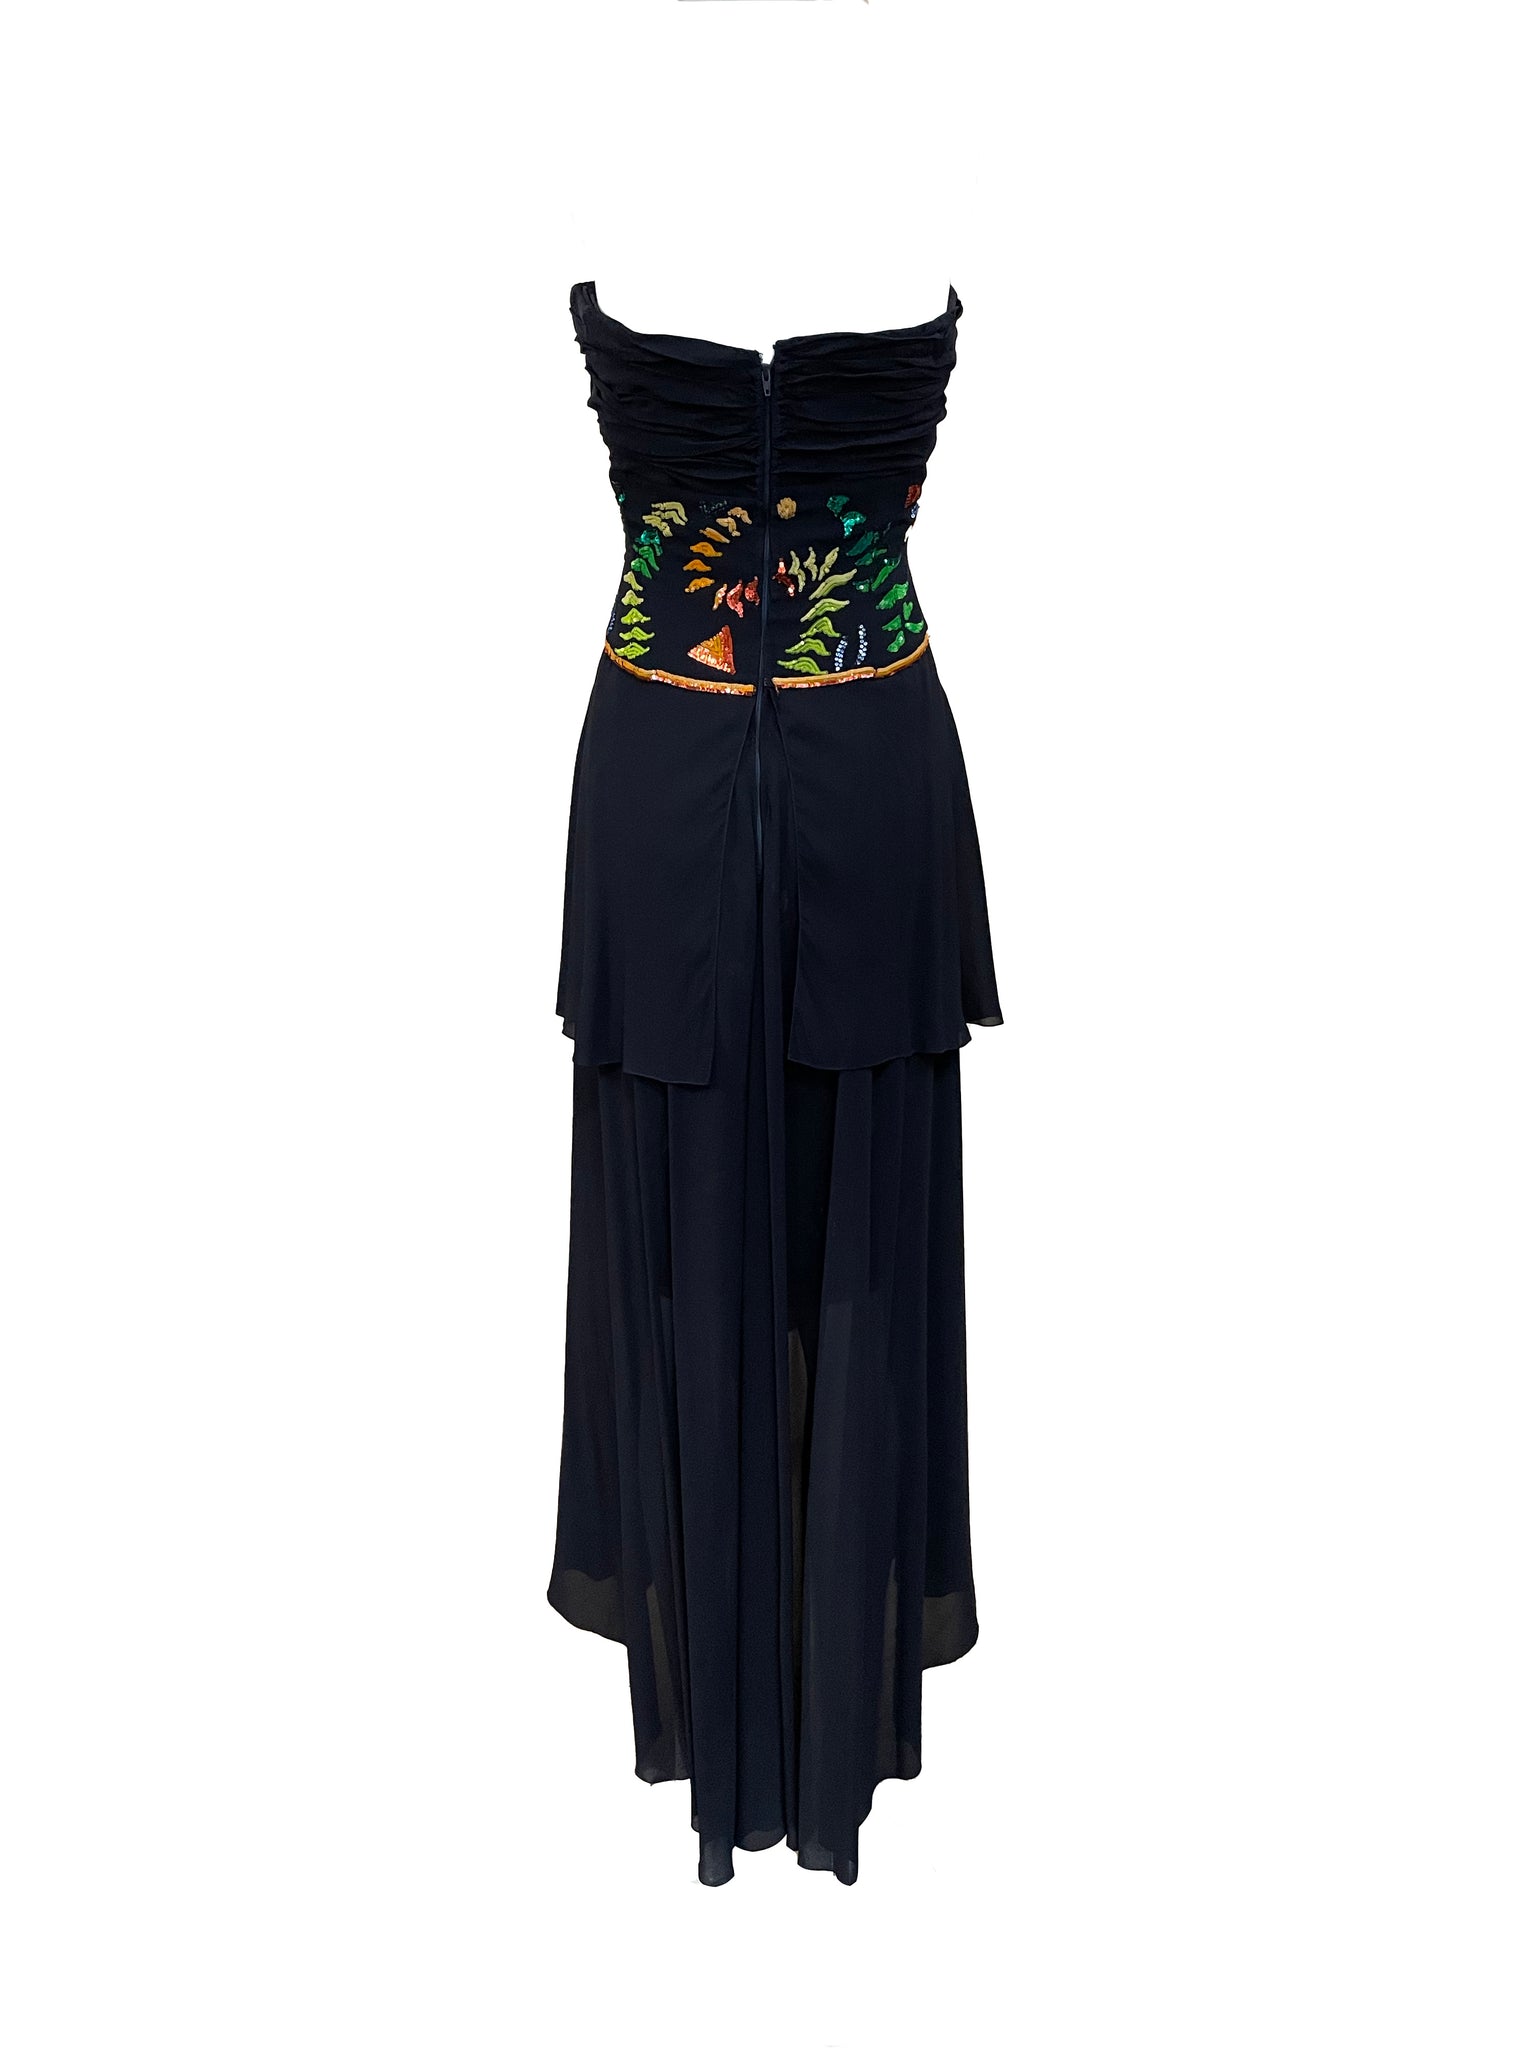  Karl  Lagerfeld 80s Midnight Blue Sequined  Strapless Cocktail Dress BACK 3 of 5